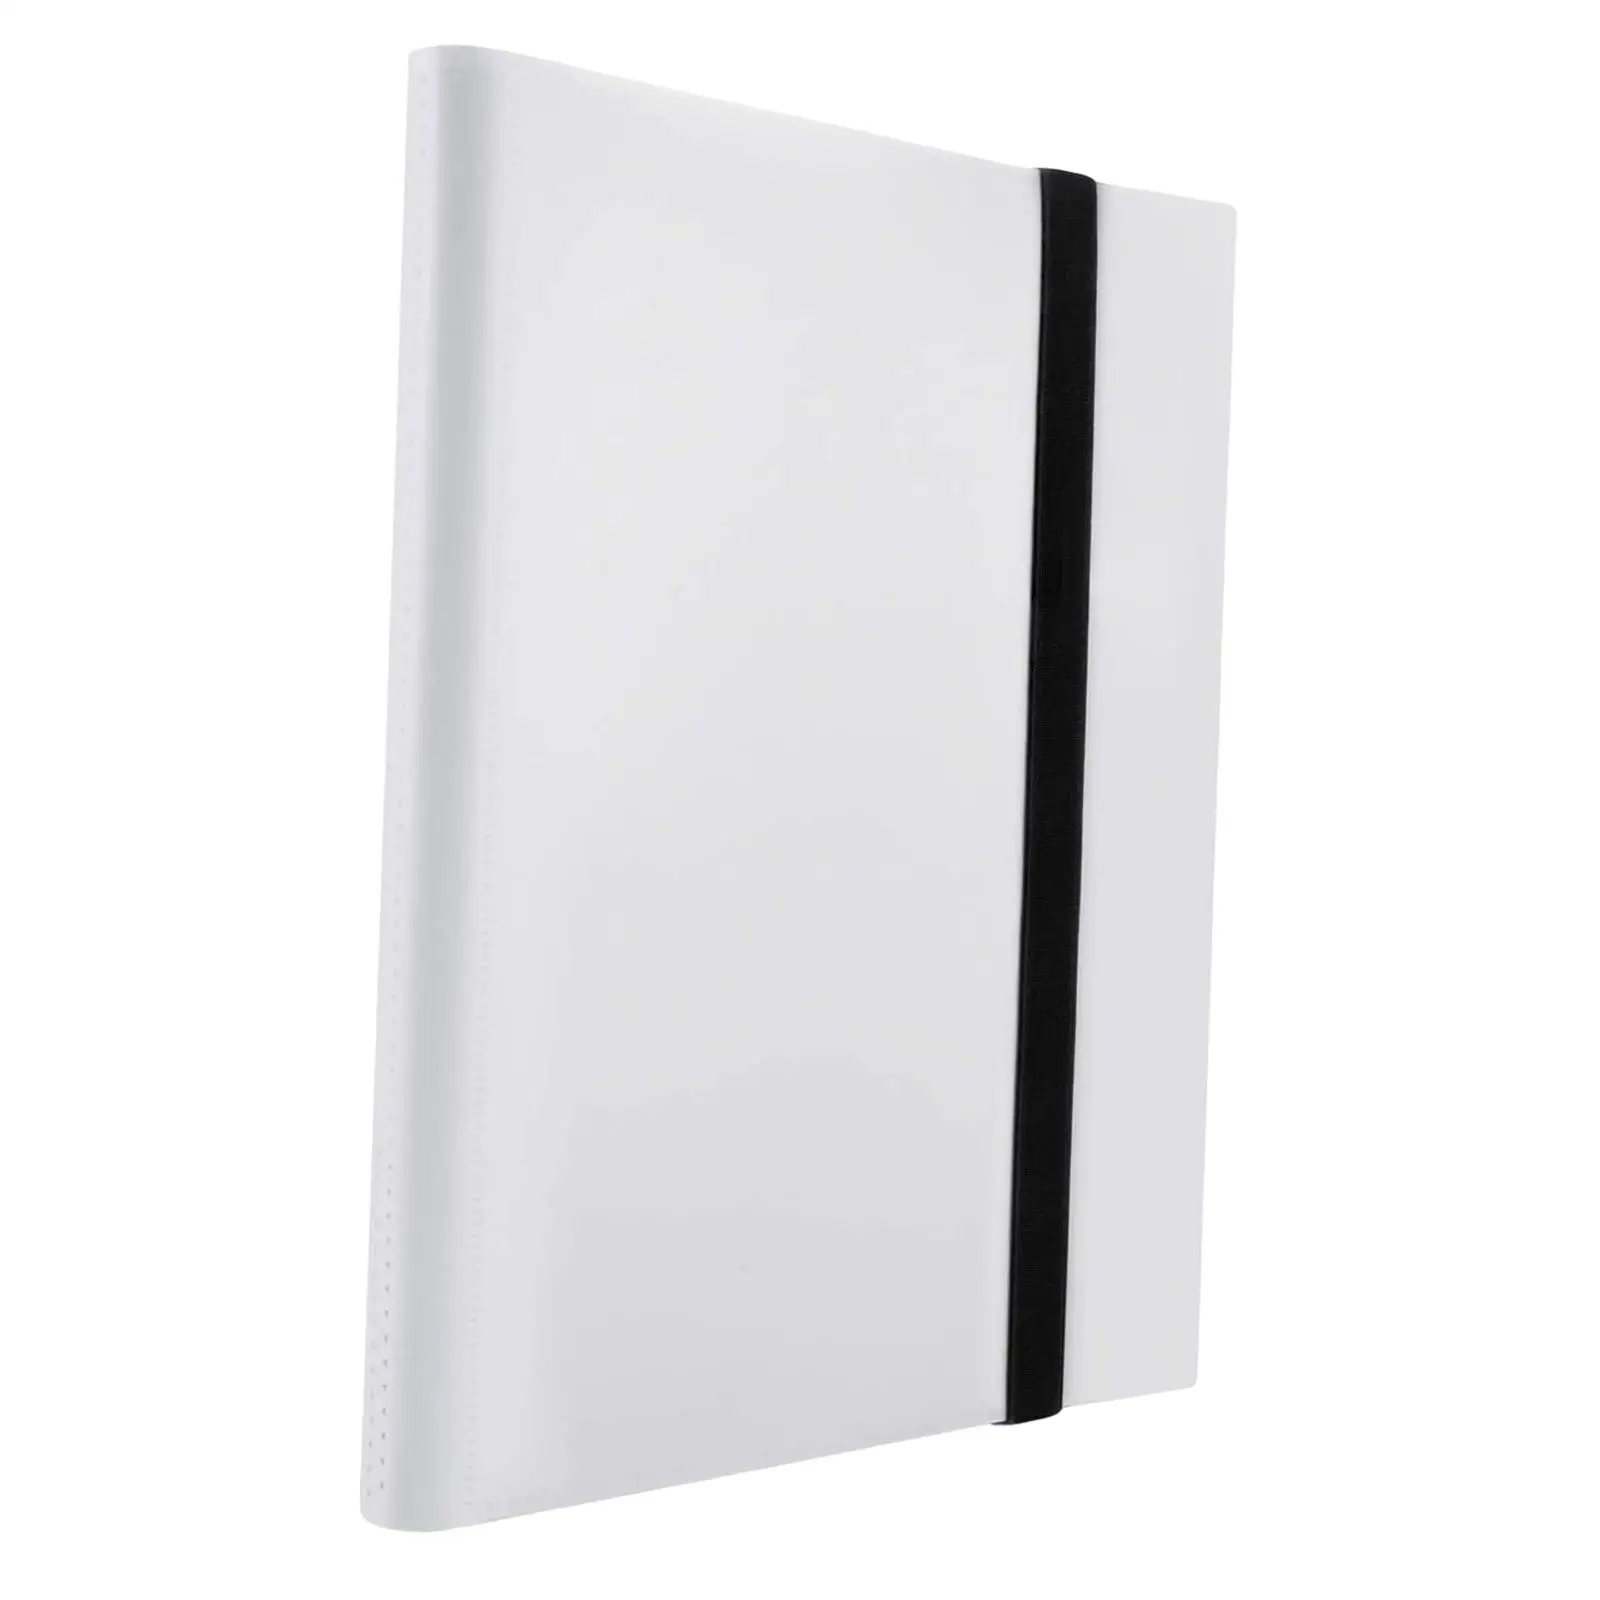 432 Double Sided Album Carrying Card Organizer Baseball Card Sleeves Storage Book Album Display Holder for Business Cards